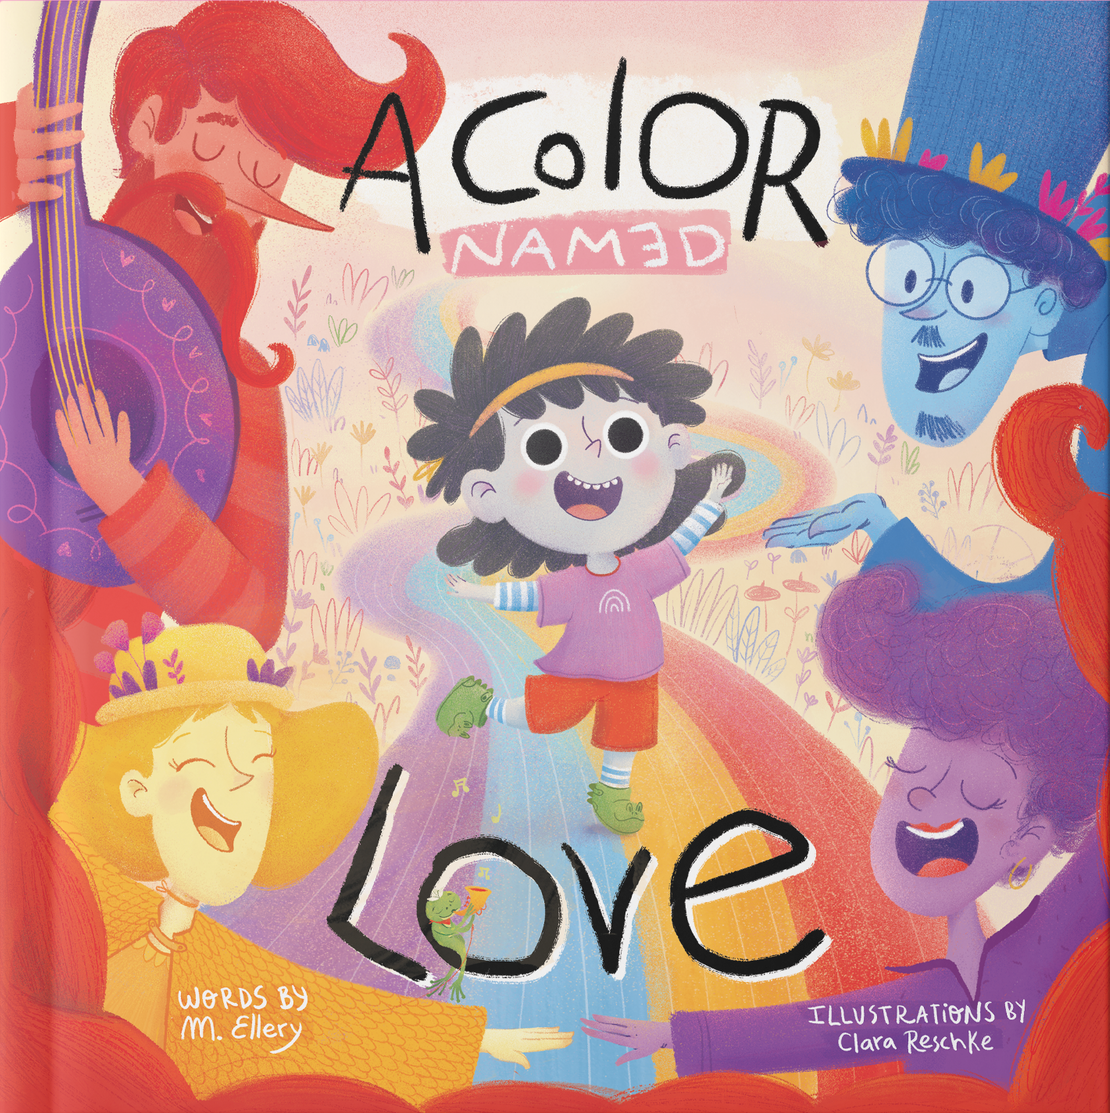 A Color Named Love by M. Ellery and Clara Reschke